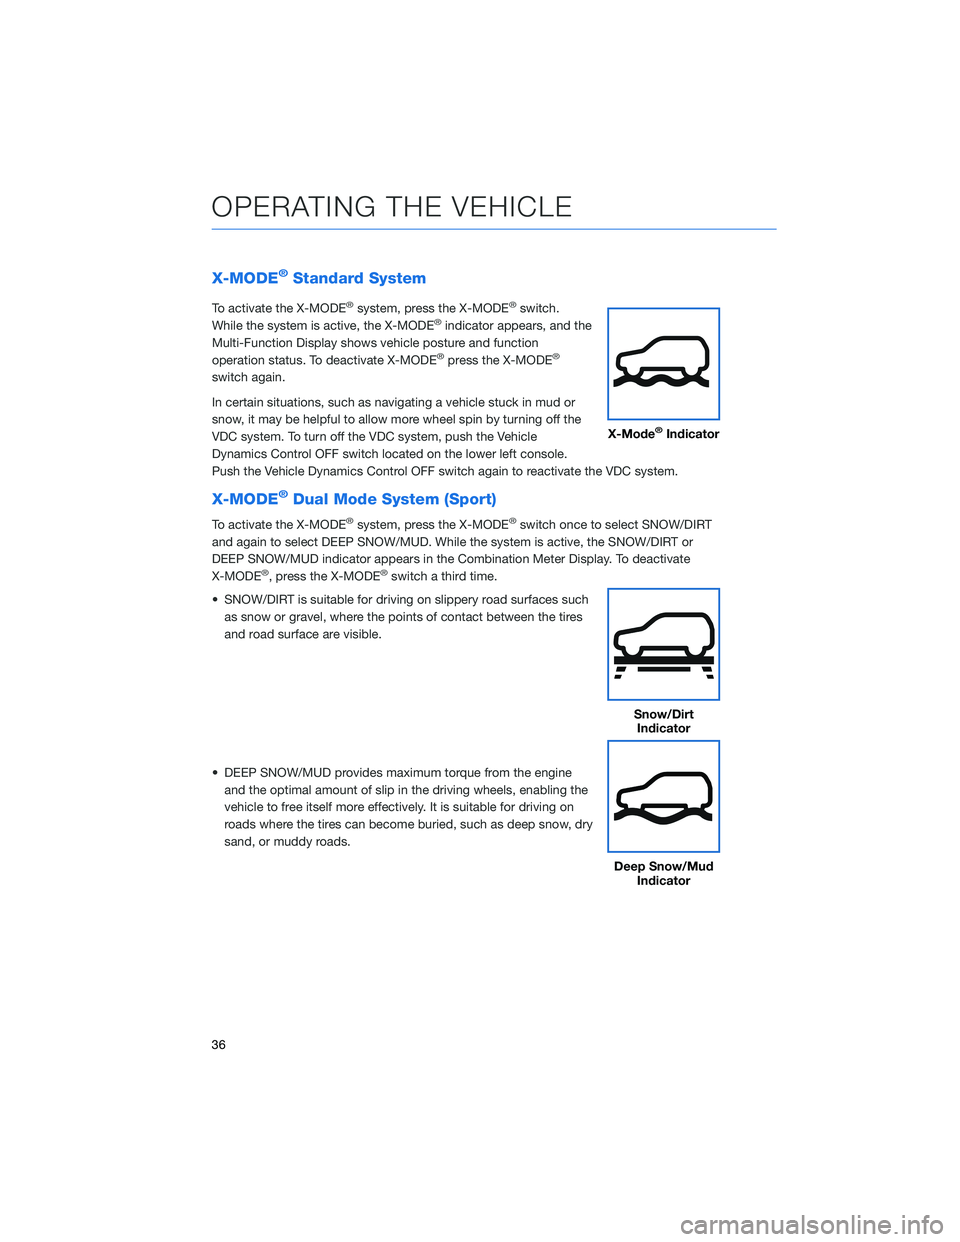 SUBARU CROSSTREK 2022  Getting Started Guide X-MODE®Standard System
To activate the X-MODE®system, press the X-MODE®switch.
While the system is active, the X-MODE®indicator appears, and the
Multi-Function Display shows vehicle posture and fu